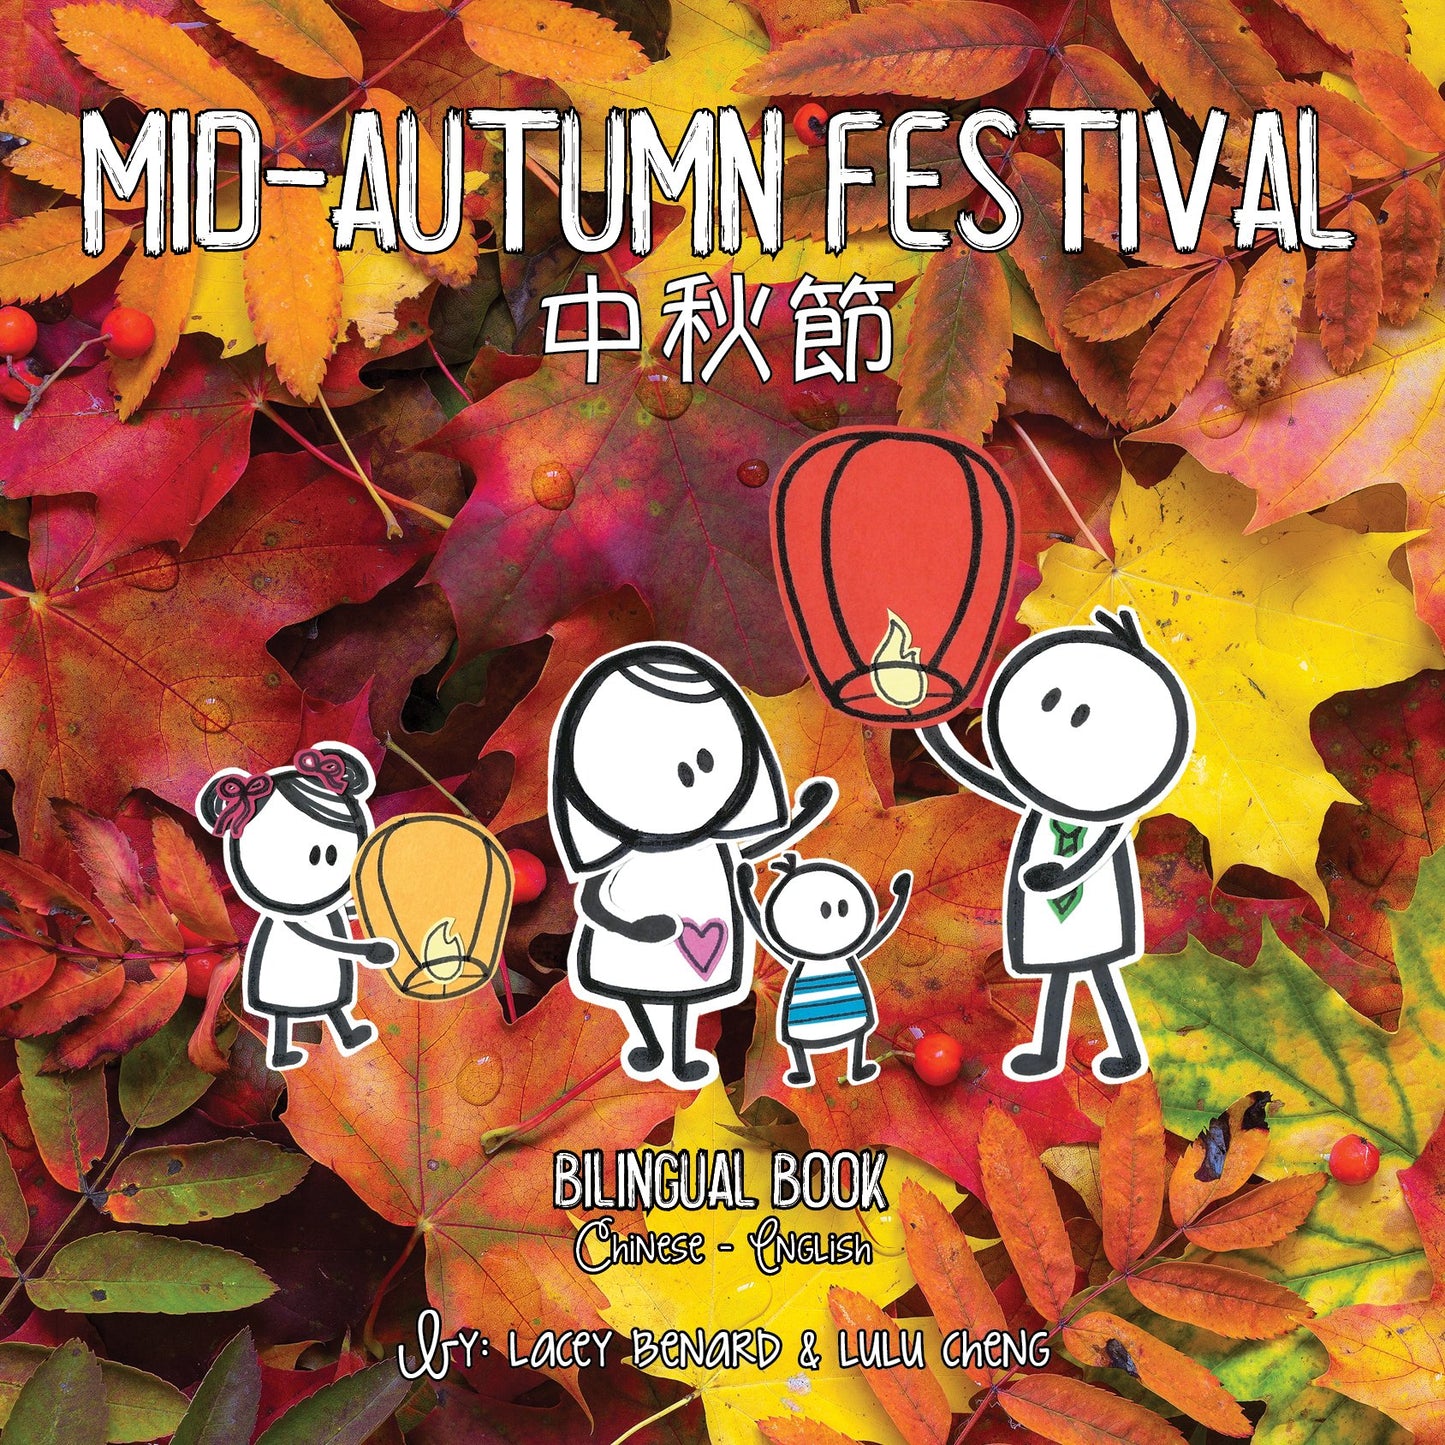 Mid-Autumn Festival 中秋節, is a bilingual board book with English and Traditional Chinese, by Lacey Benard and Lulu Cheng, written in English, traditional Chinese, pinyin and zhuyin.